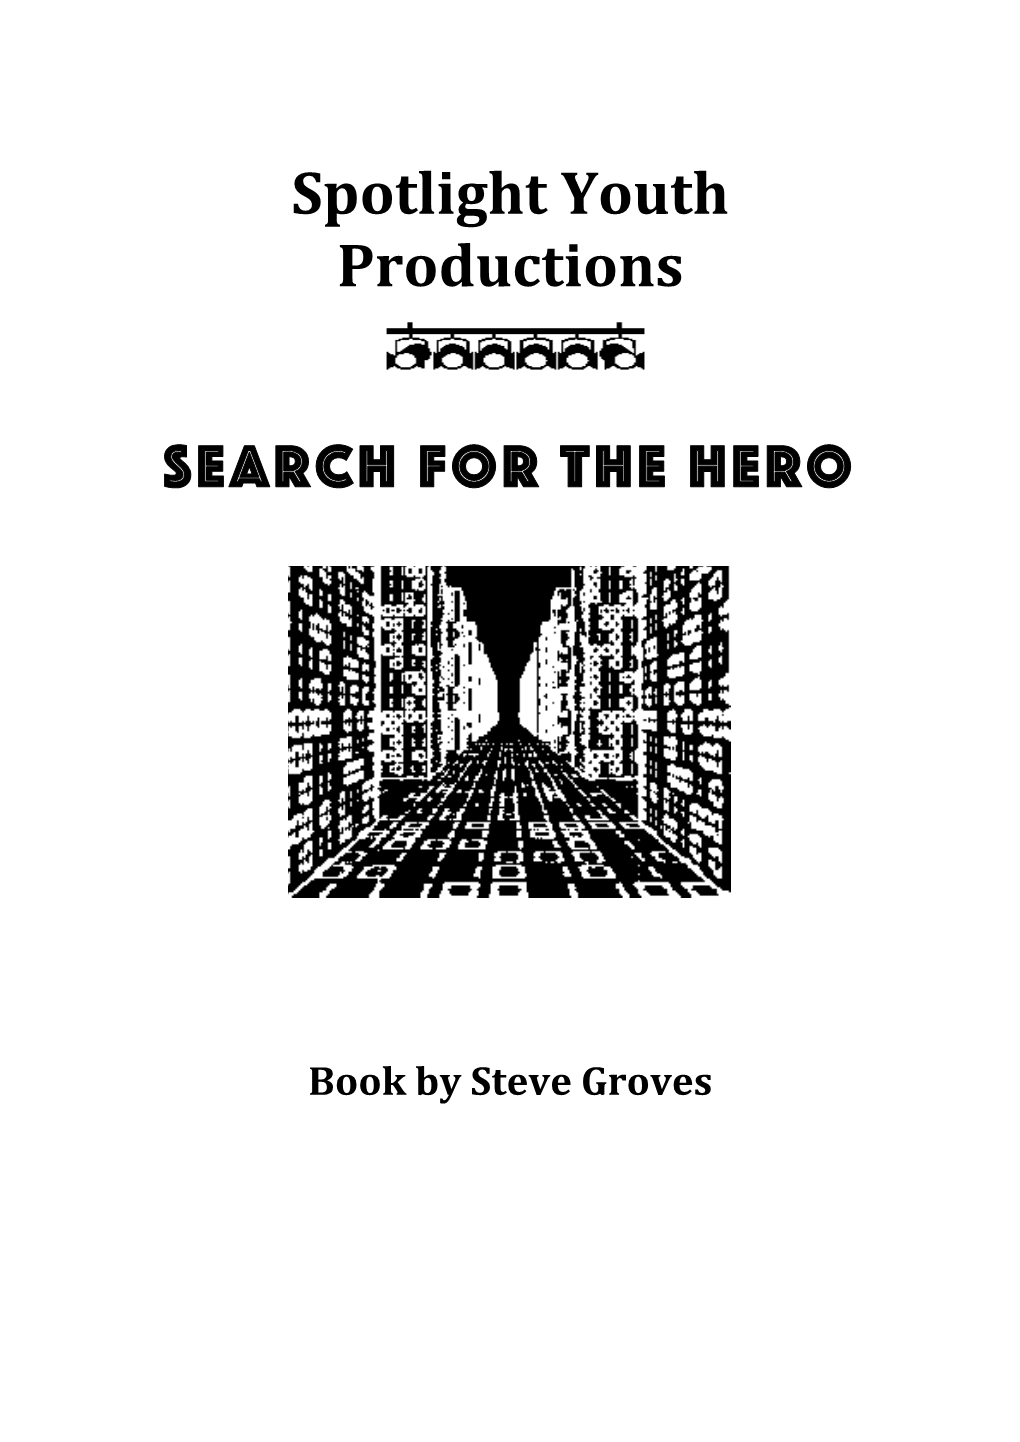 Spotlight Youth Productions Search for the Hero